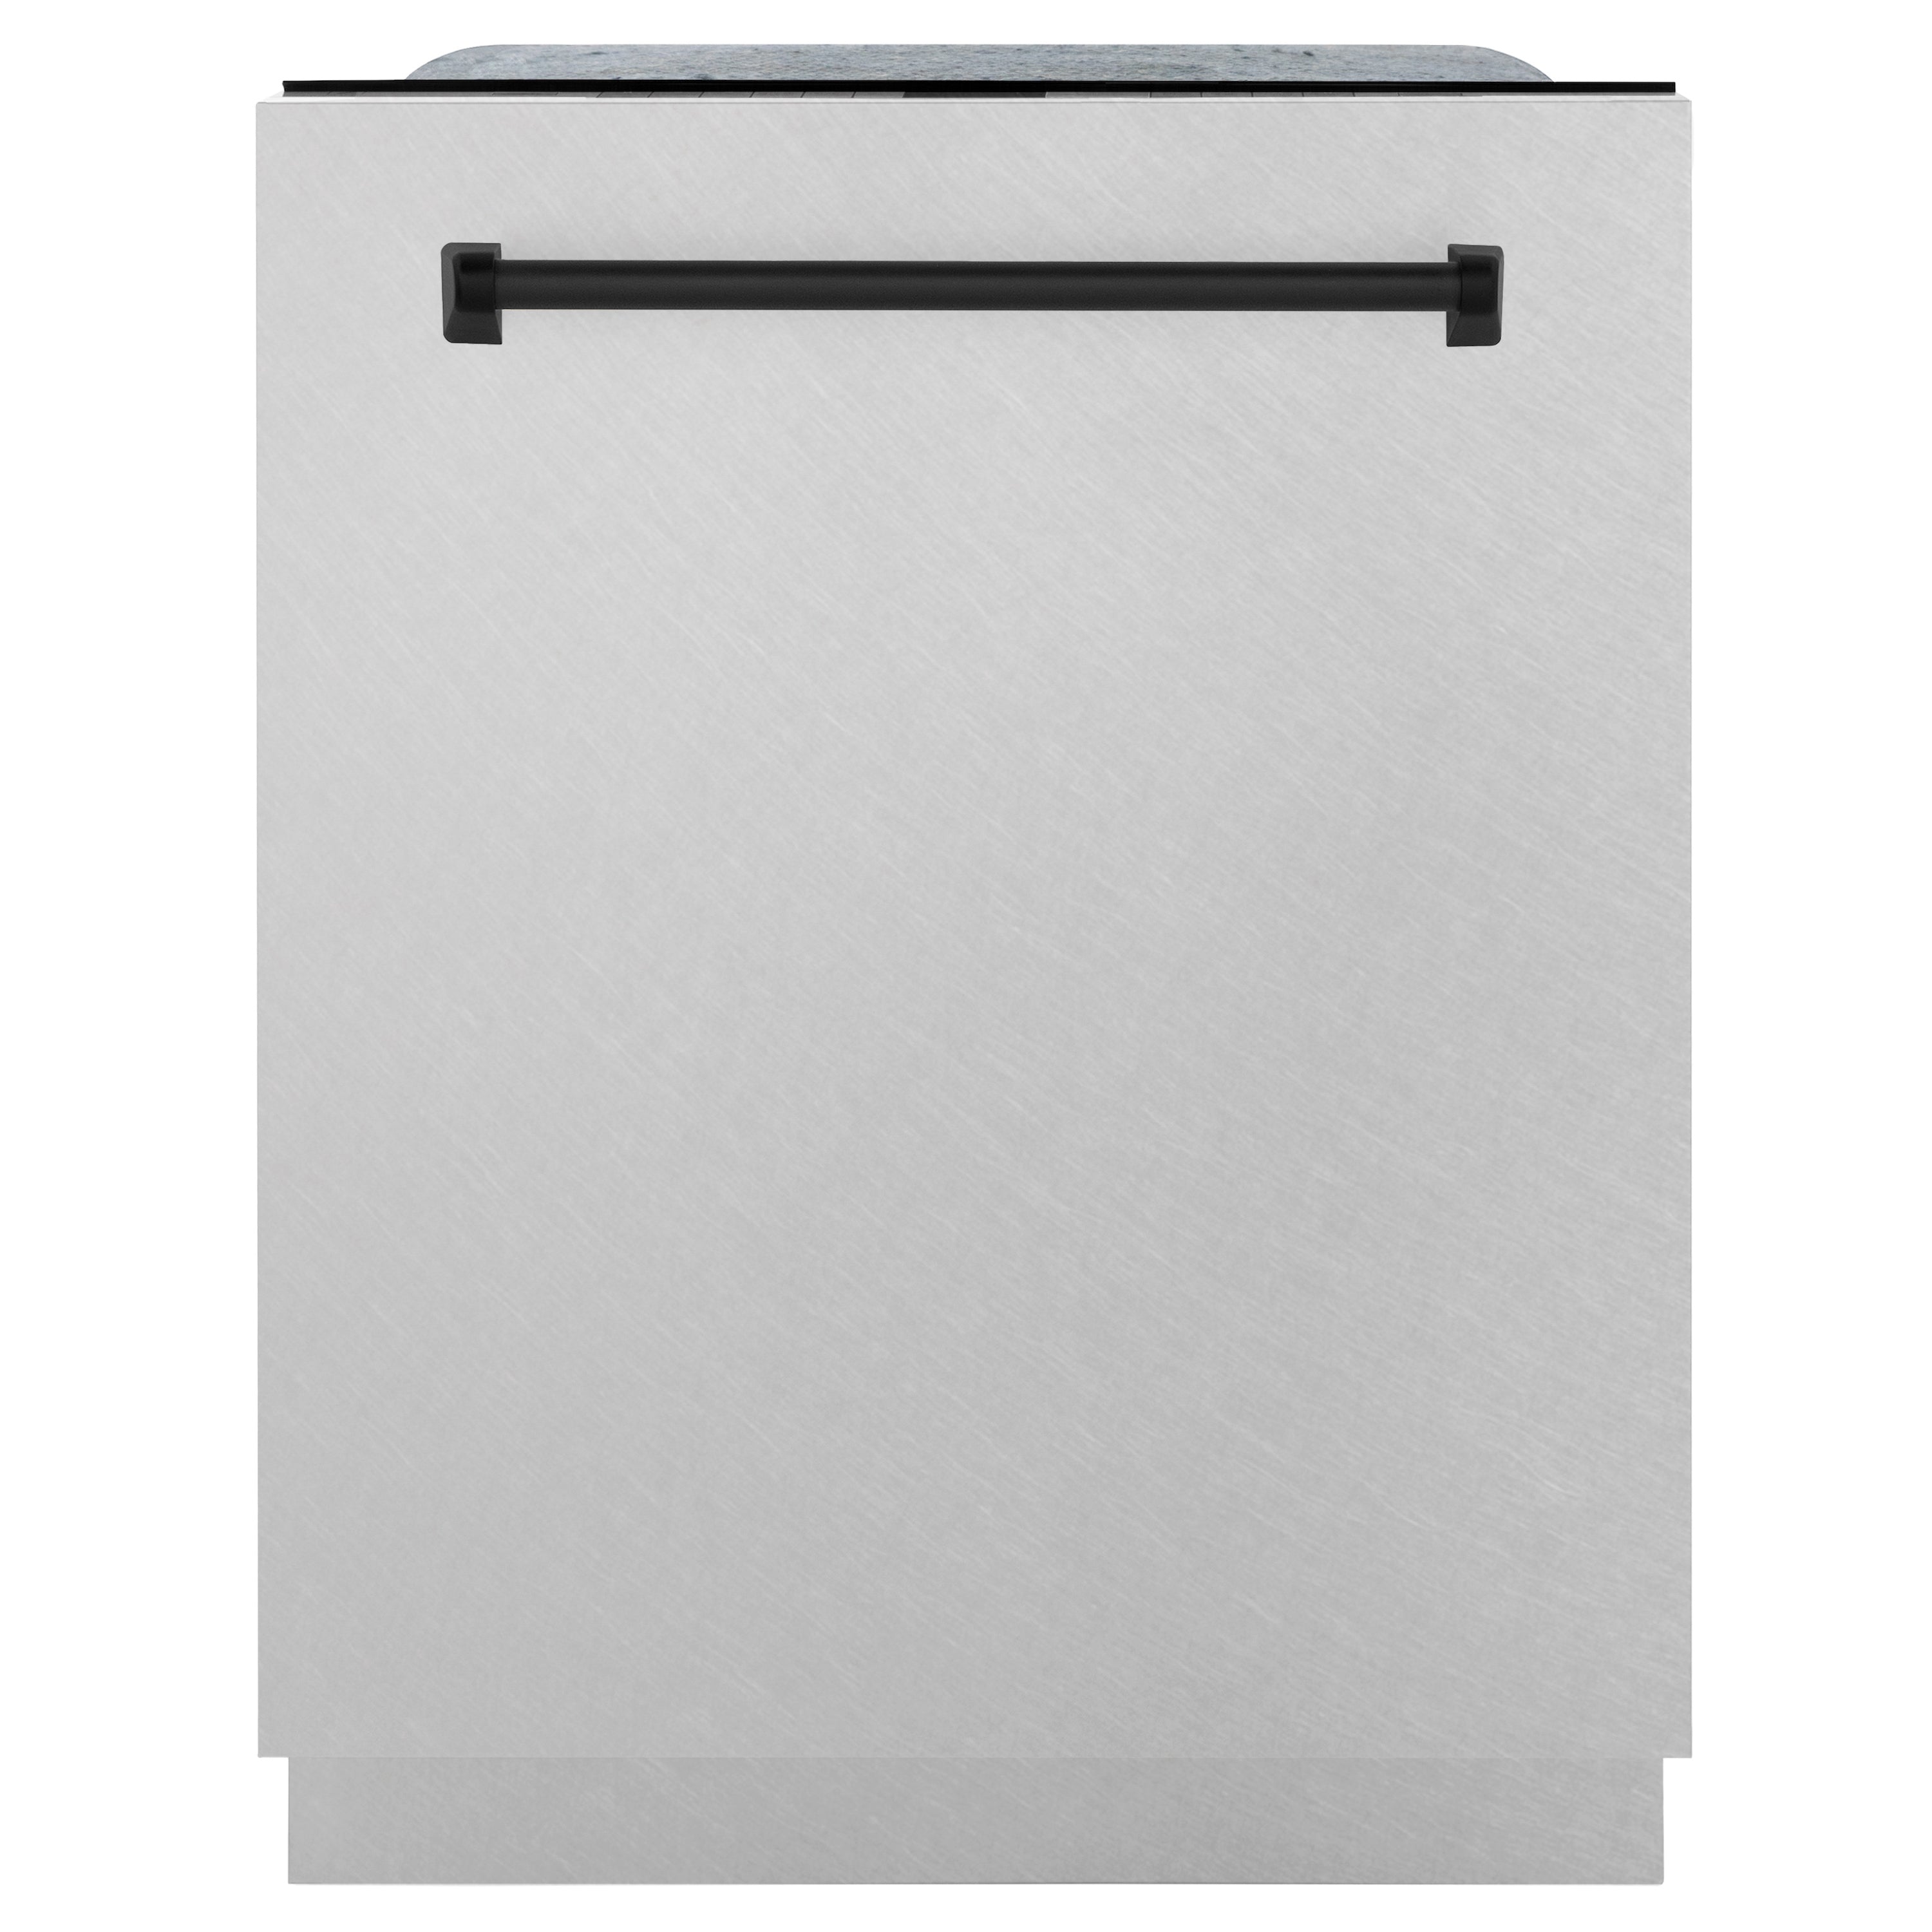 ZLINE Autograph Edition 24" 3rd Rack Top Touch Control Tall Tub Dishwasher in DuraSnow Stainless Steel with Accent Handle, 45dBa (DWMTZ-SN-24)